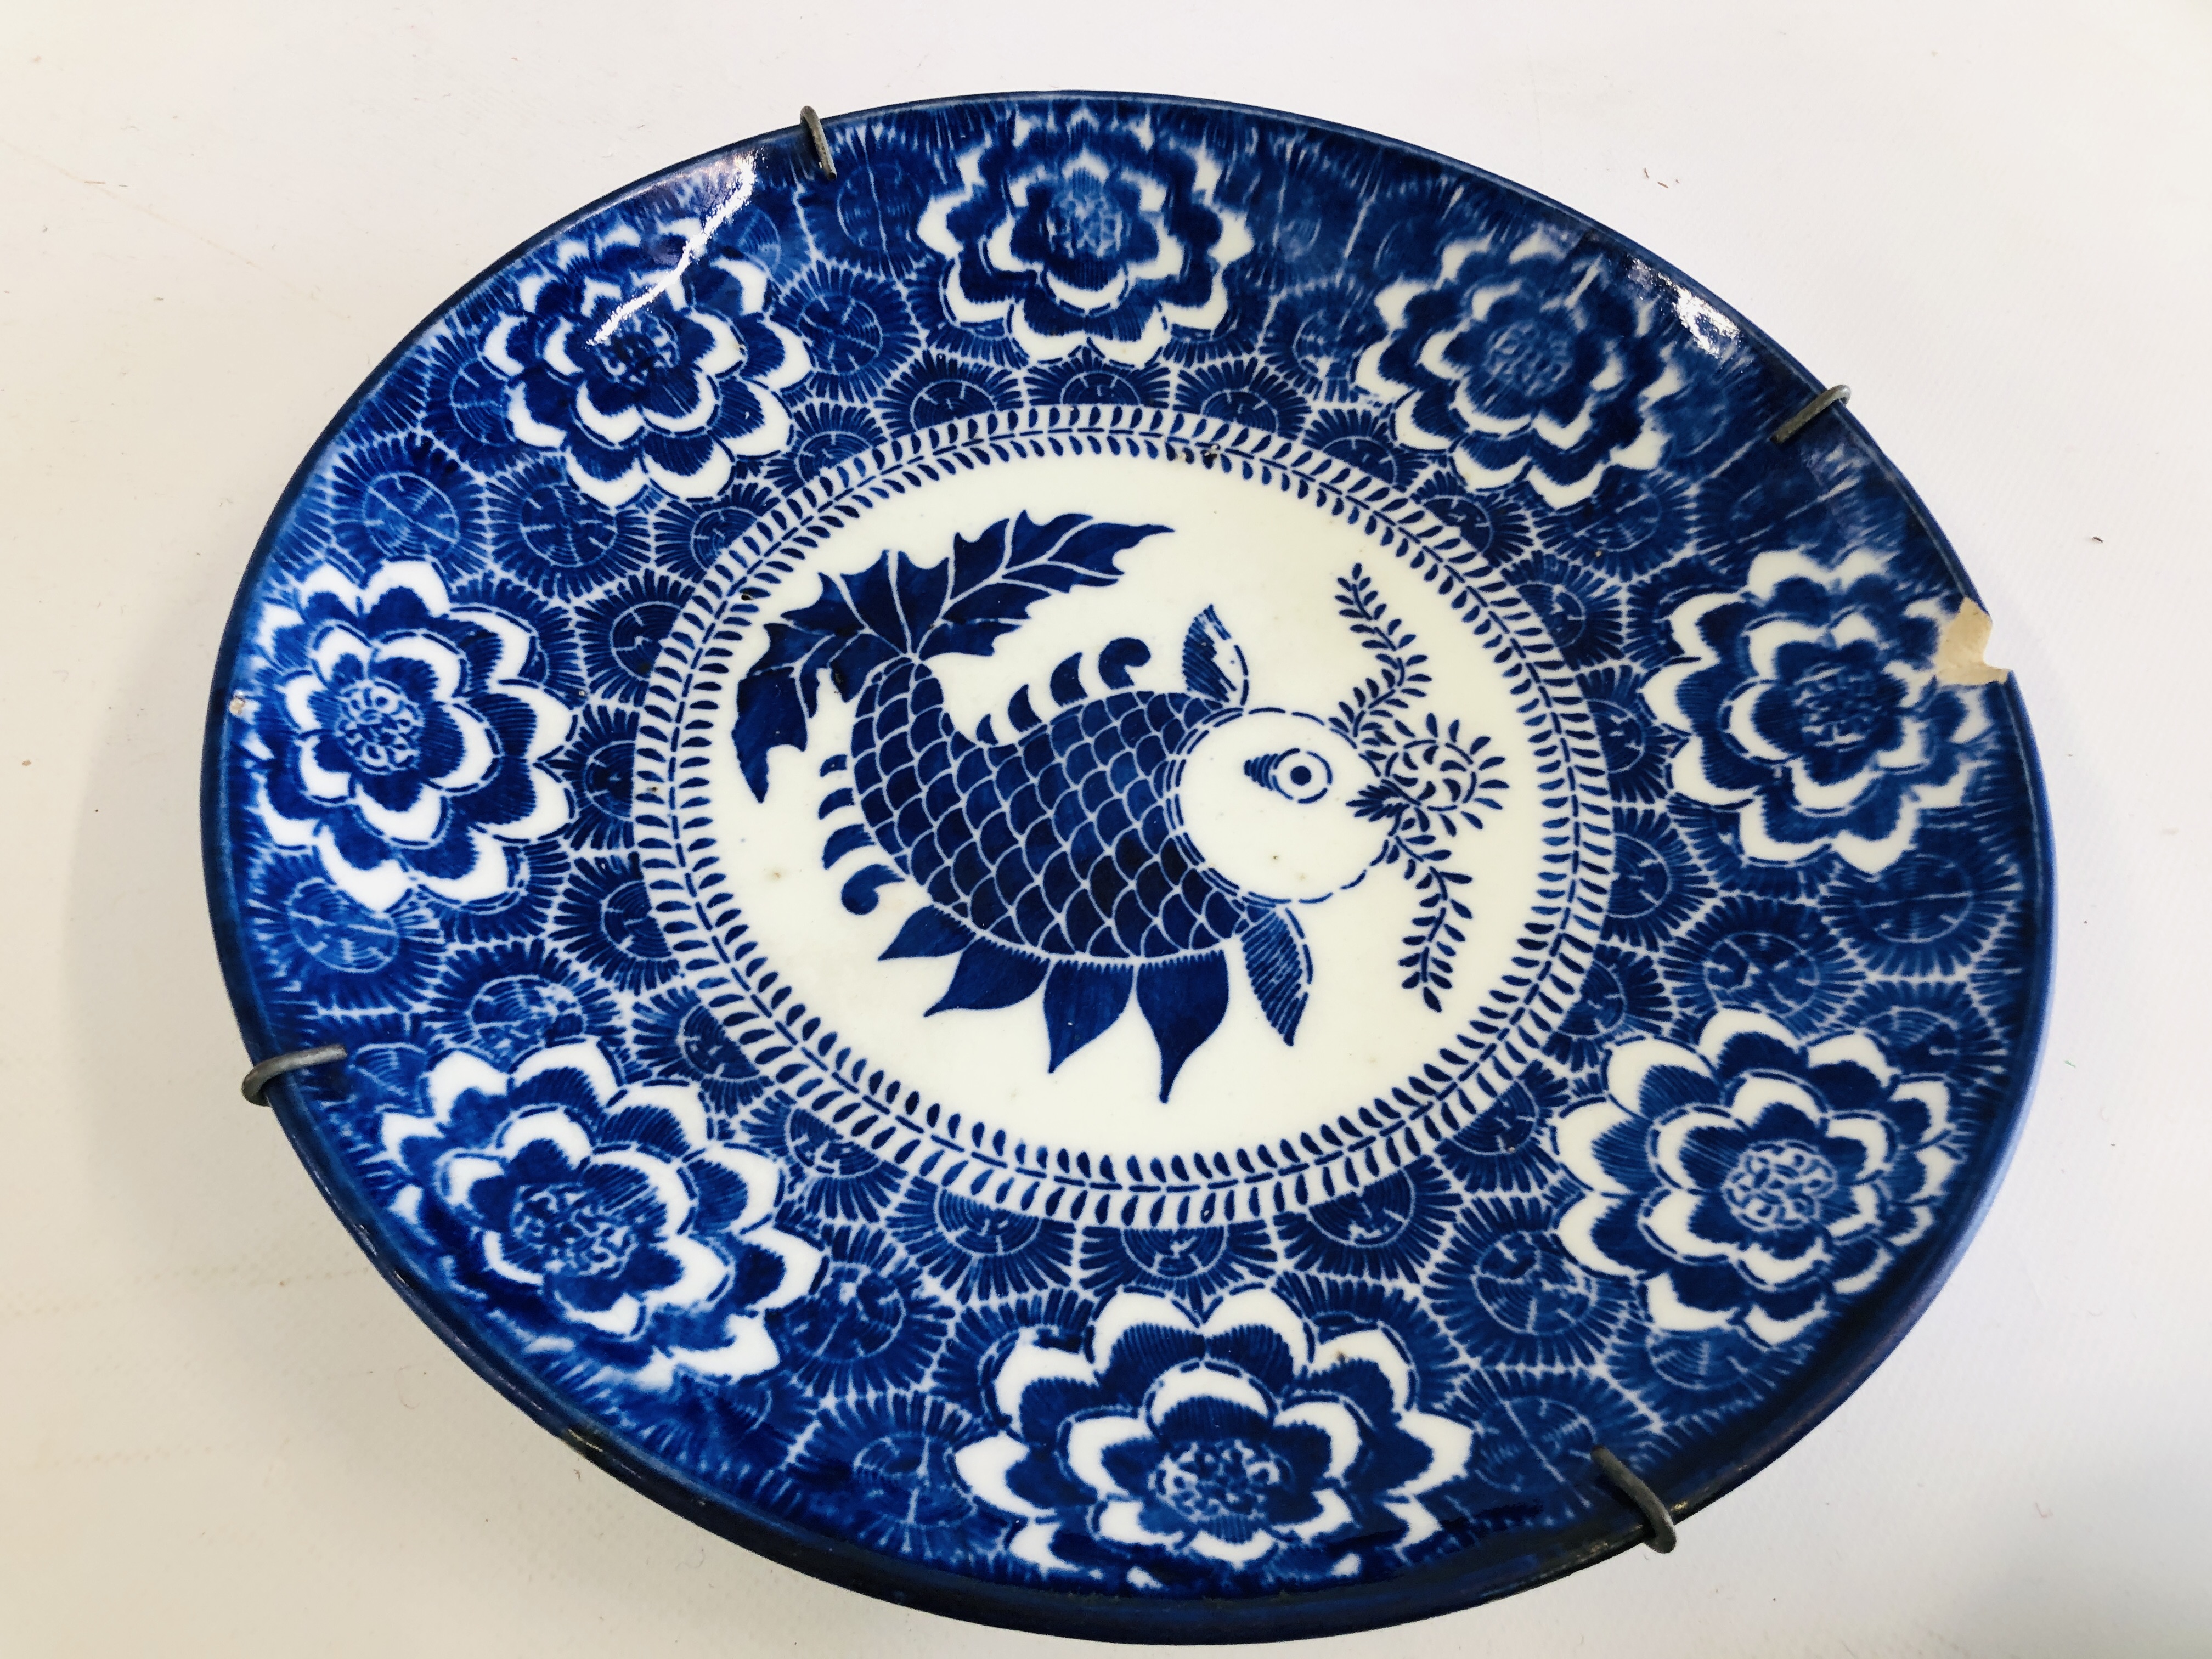 A GROUP OF CHINESE BLUE AND WHITE PLATES AND DISHES DECORATED WITH A FISH SYMBOL ALONG WITH A - Image 9 of 14